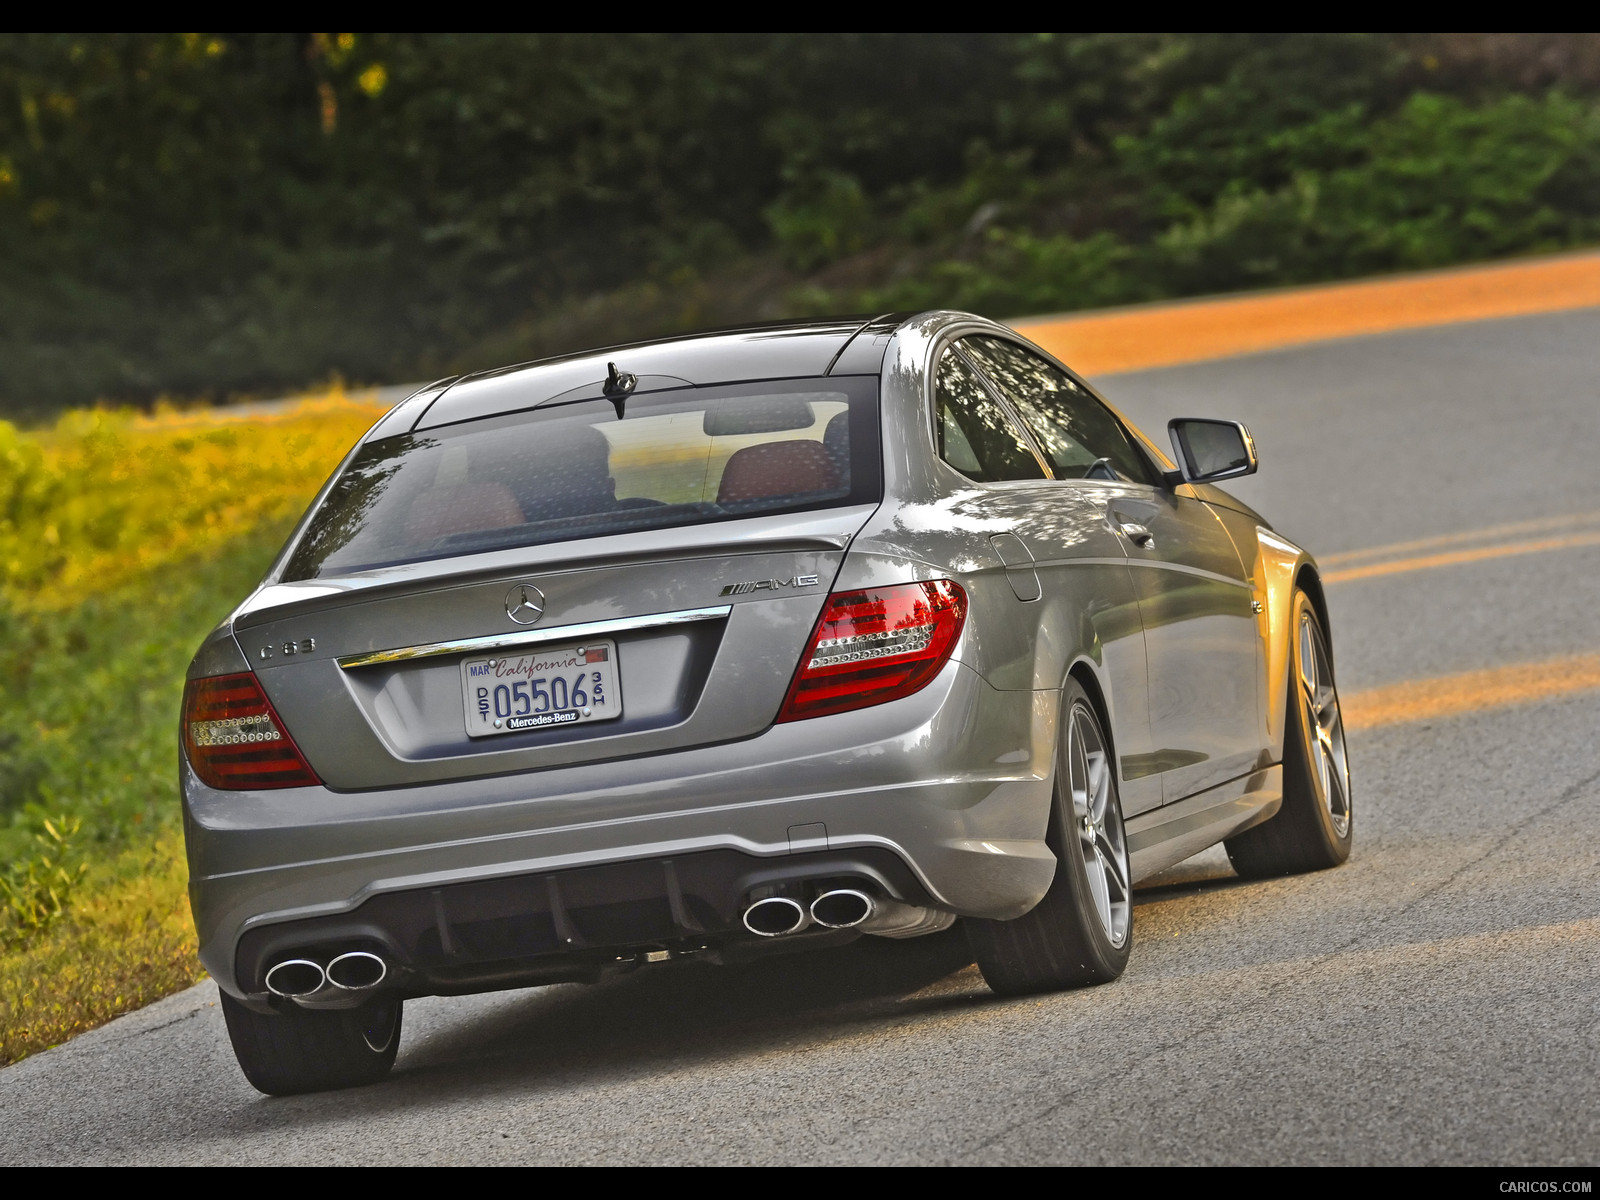 Mercedes-Benz C63 AMG Coupe (2012) with MCT transmission - , #8 of 64